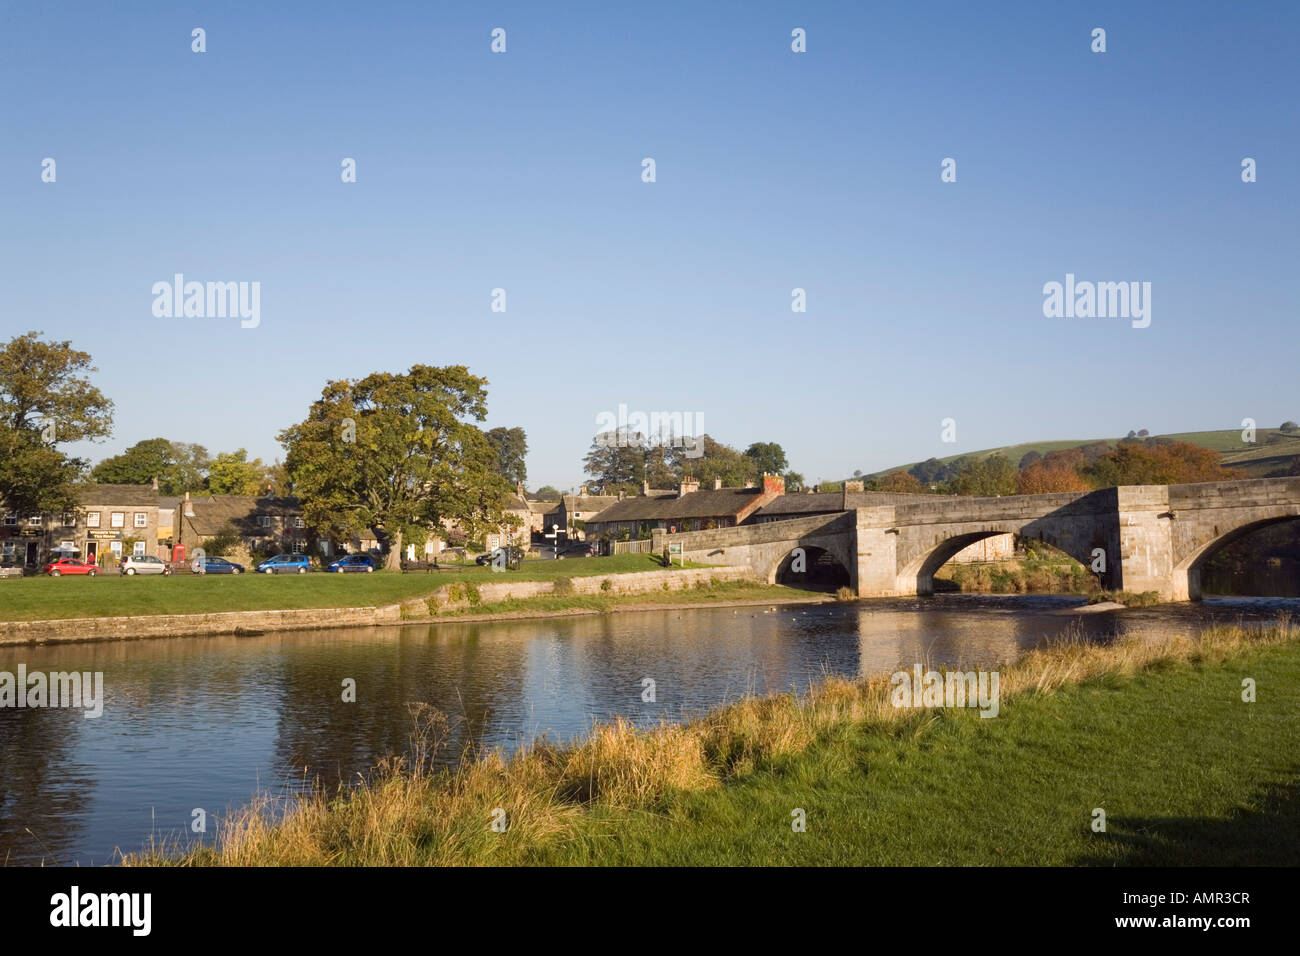 River Wharfe and stone arched bridge in picturesque village in Yorkshire Dales National Park. Burnsall Wharfedale North Yorkshire England UK Stock Photo